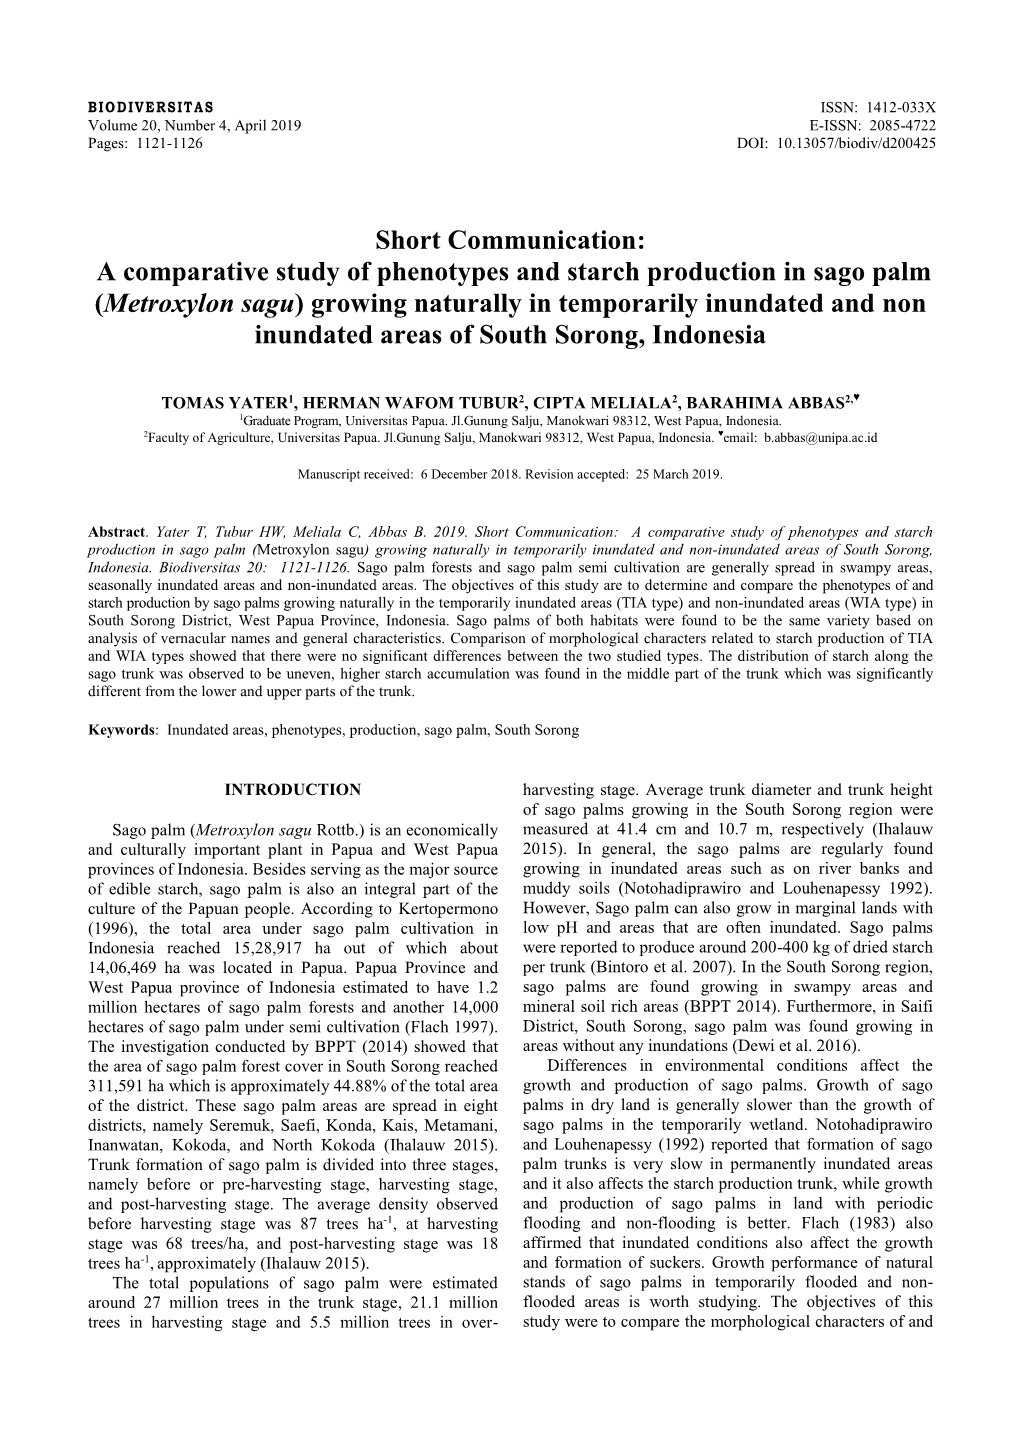 A Comparative Study of Phenotypes and Starch Production in Sago Palm